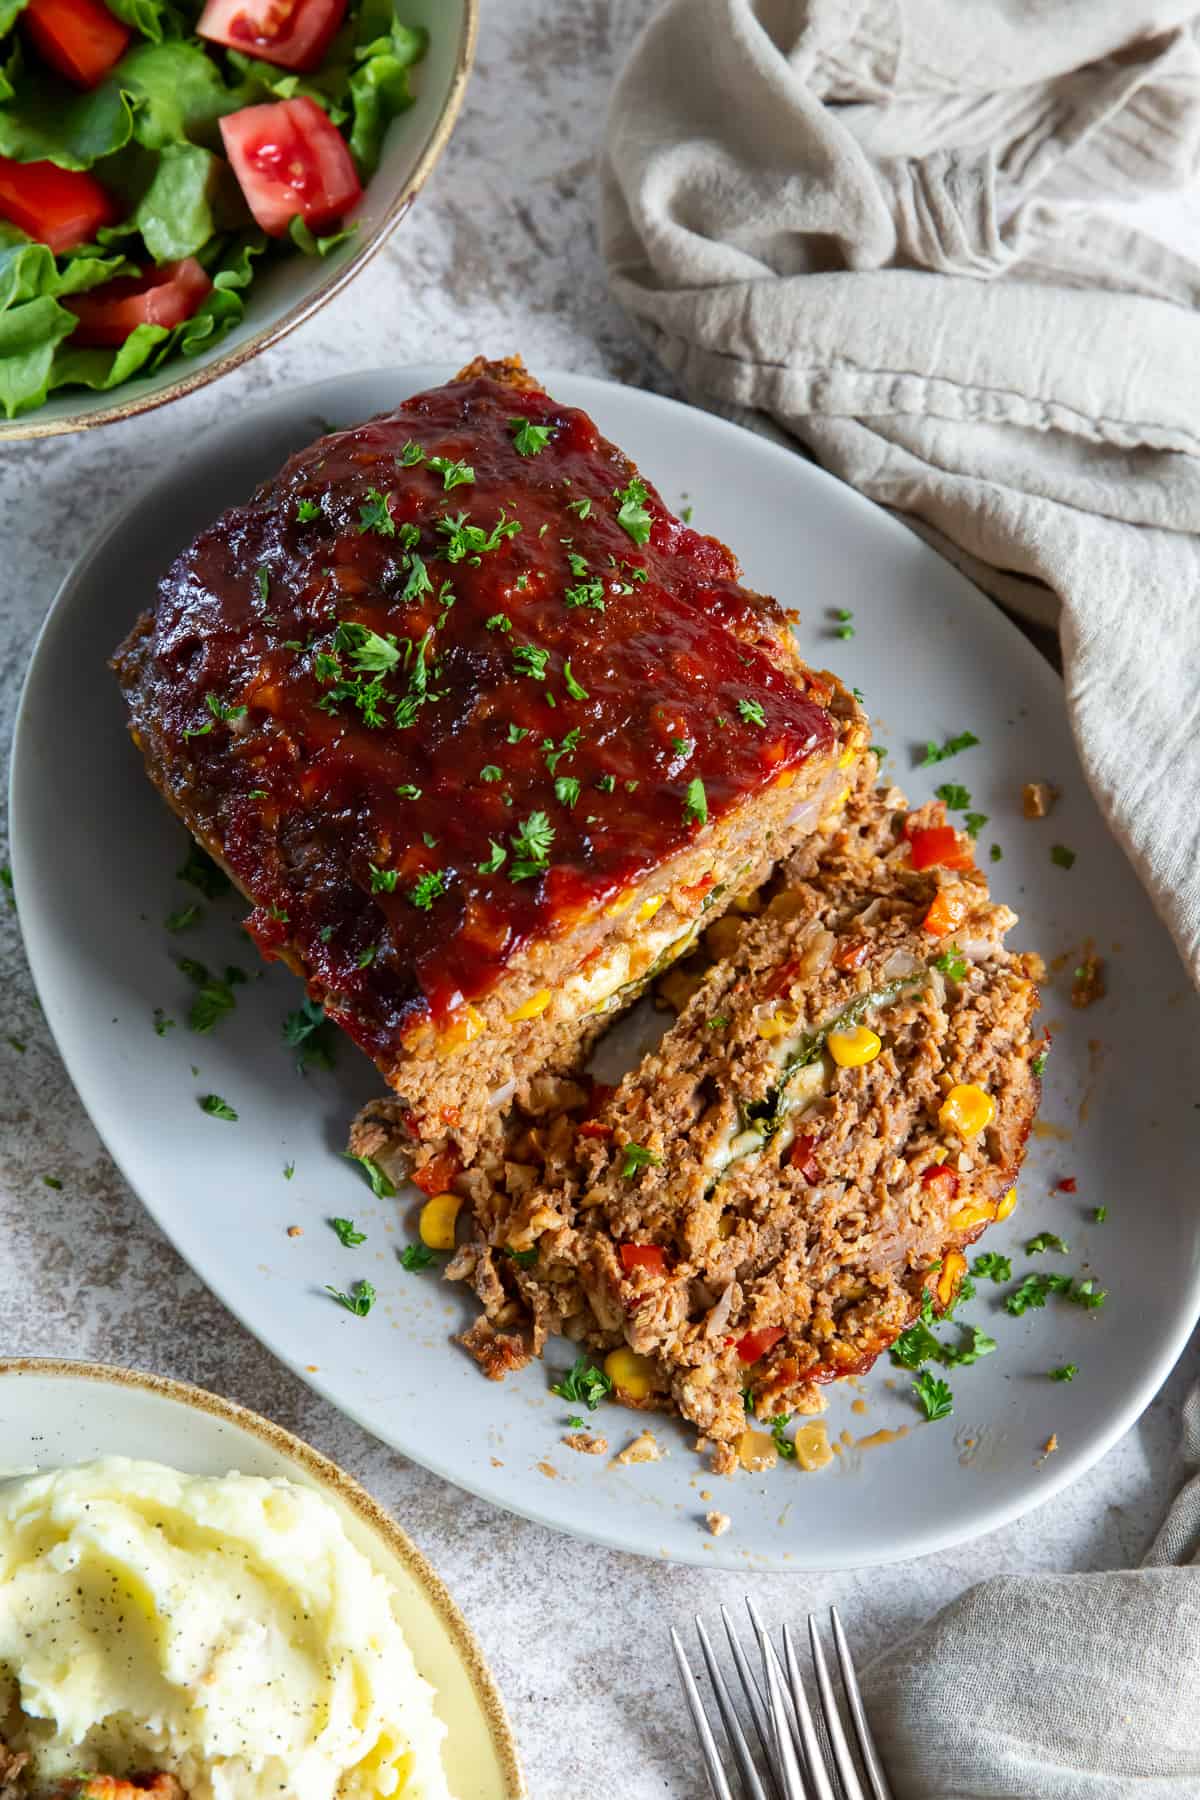 An over the top shot of a sliced cheese stuffed meatloaf.